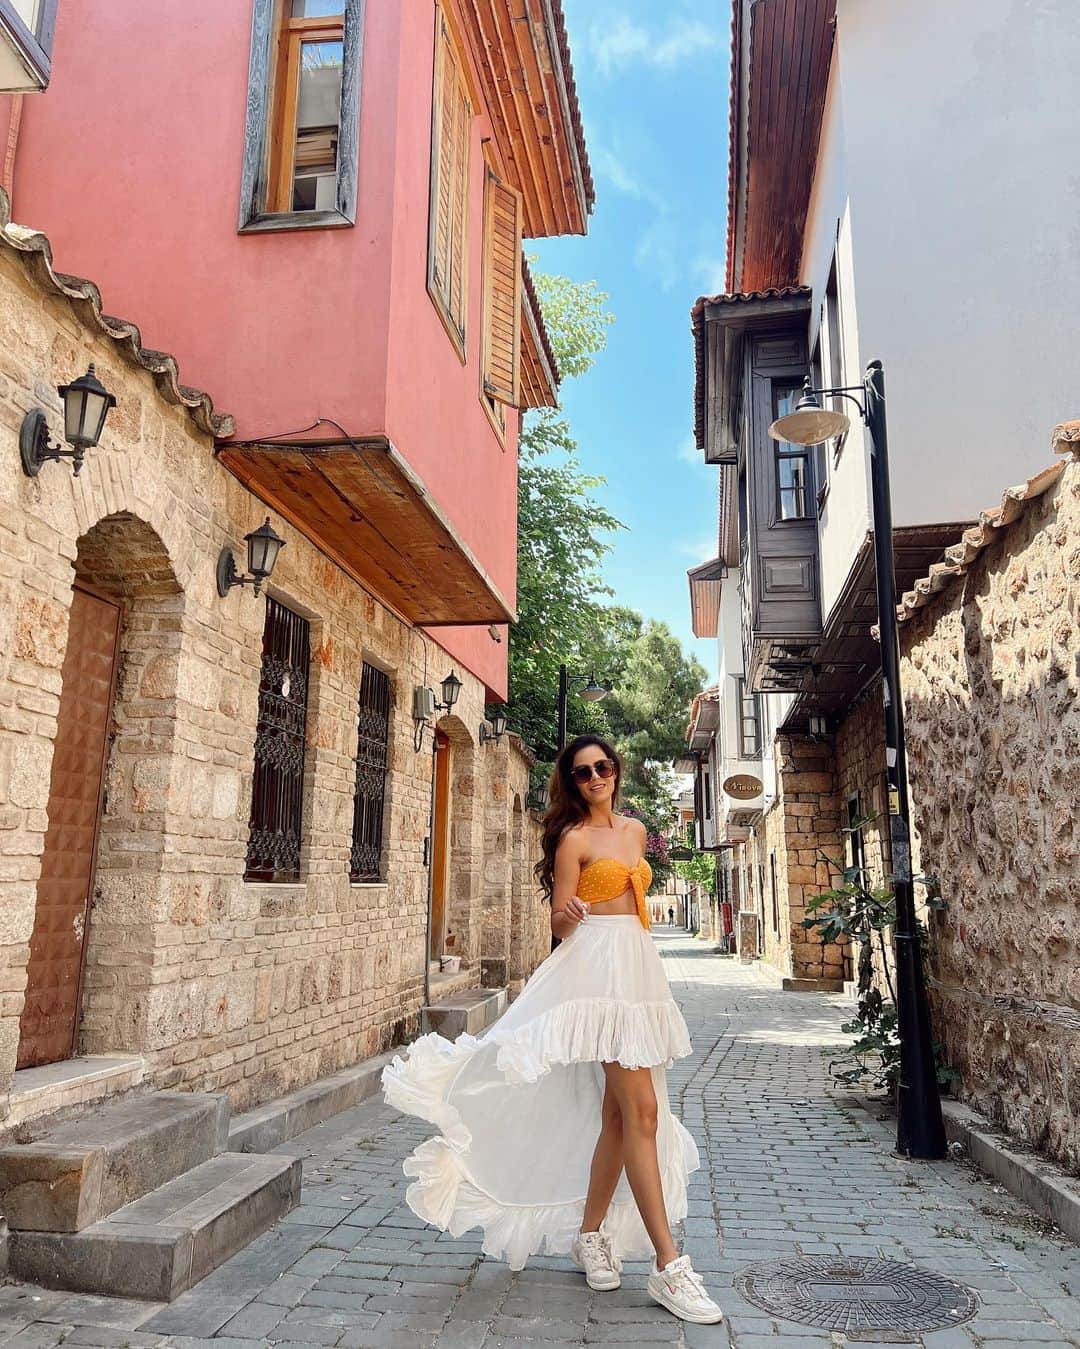 Aakriti Ranaのインスタグラム：「From the gorgeous streets of the The Old Town in Antalya, Turkey! ❤️ So much history and such beautiful architecture with lots of interesting local shops.   📸 @iparichoudhary   #aakritirana #antalya #turkey #travel #oldtown #indiantravelblogger #travelphotography #wanderlust #travelblogger #history」